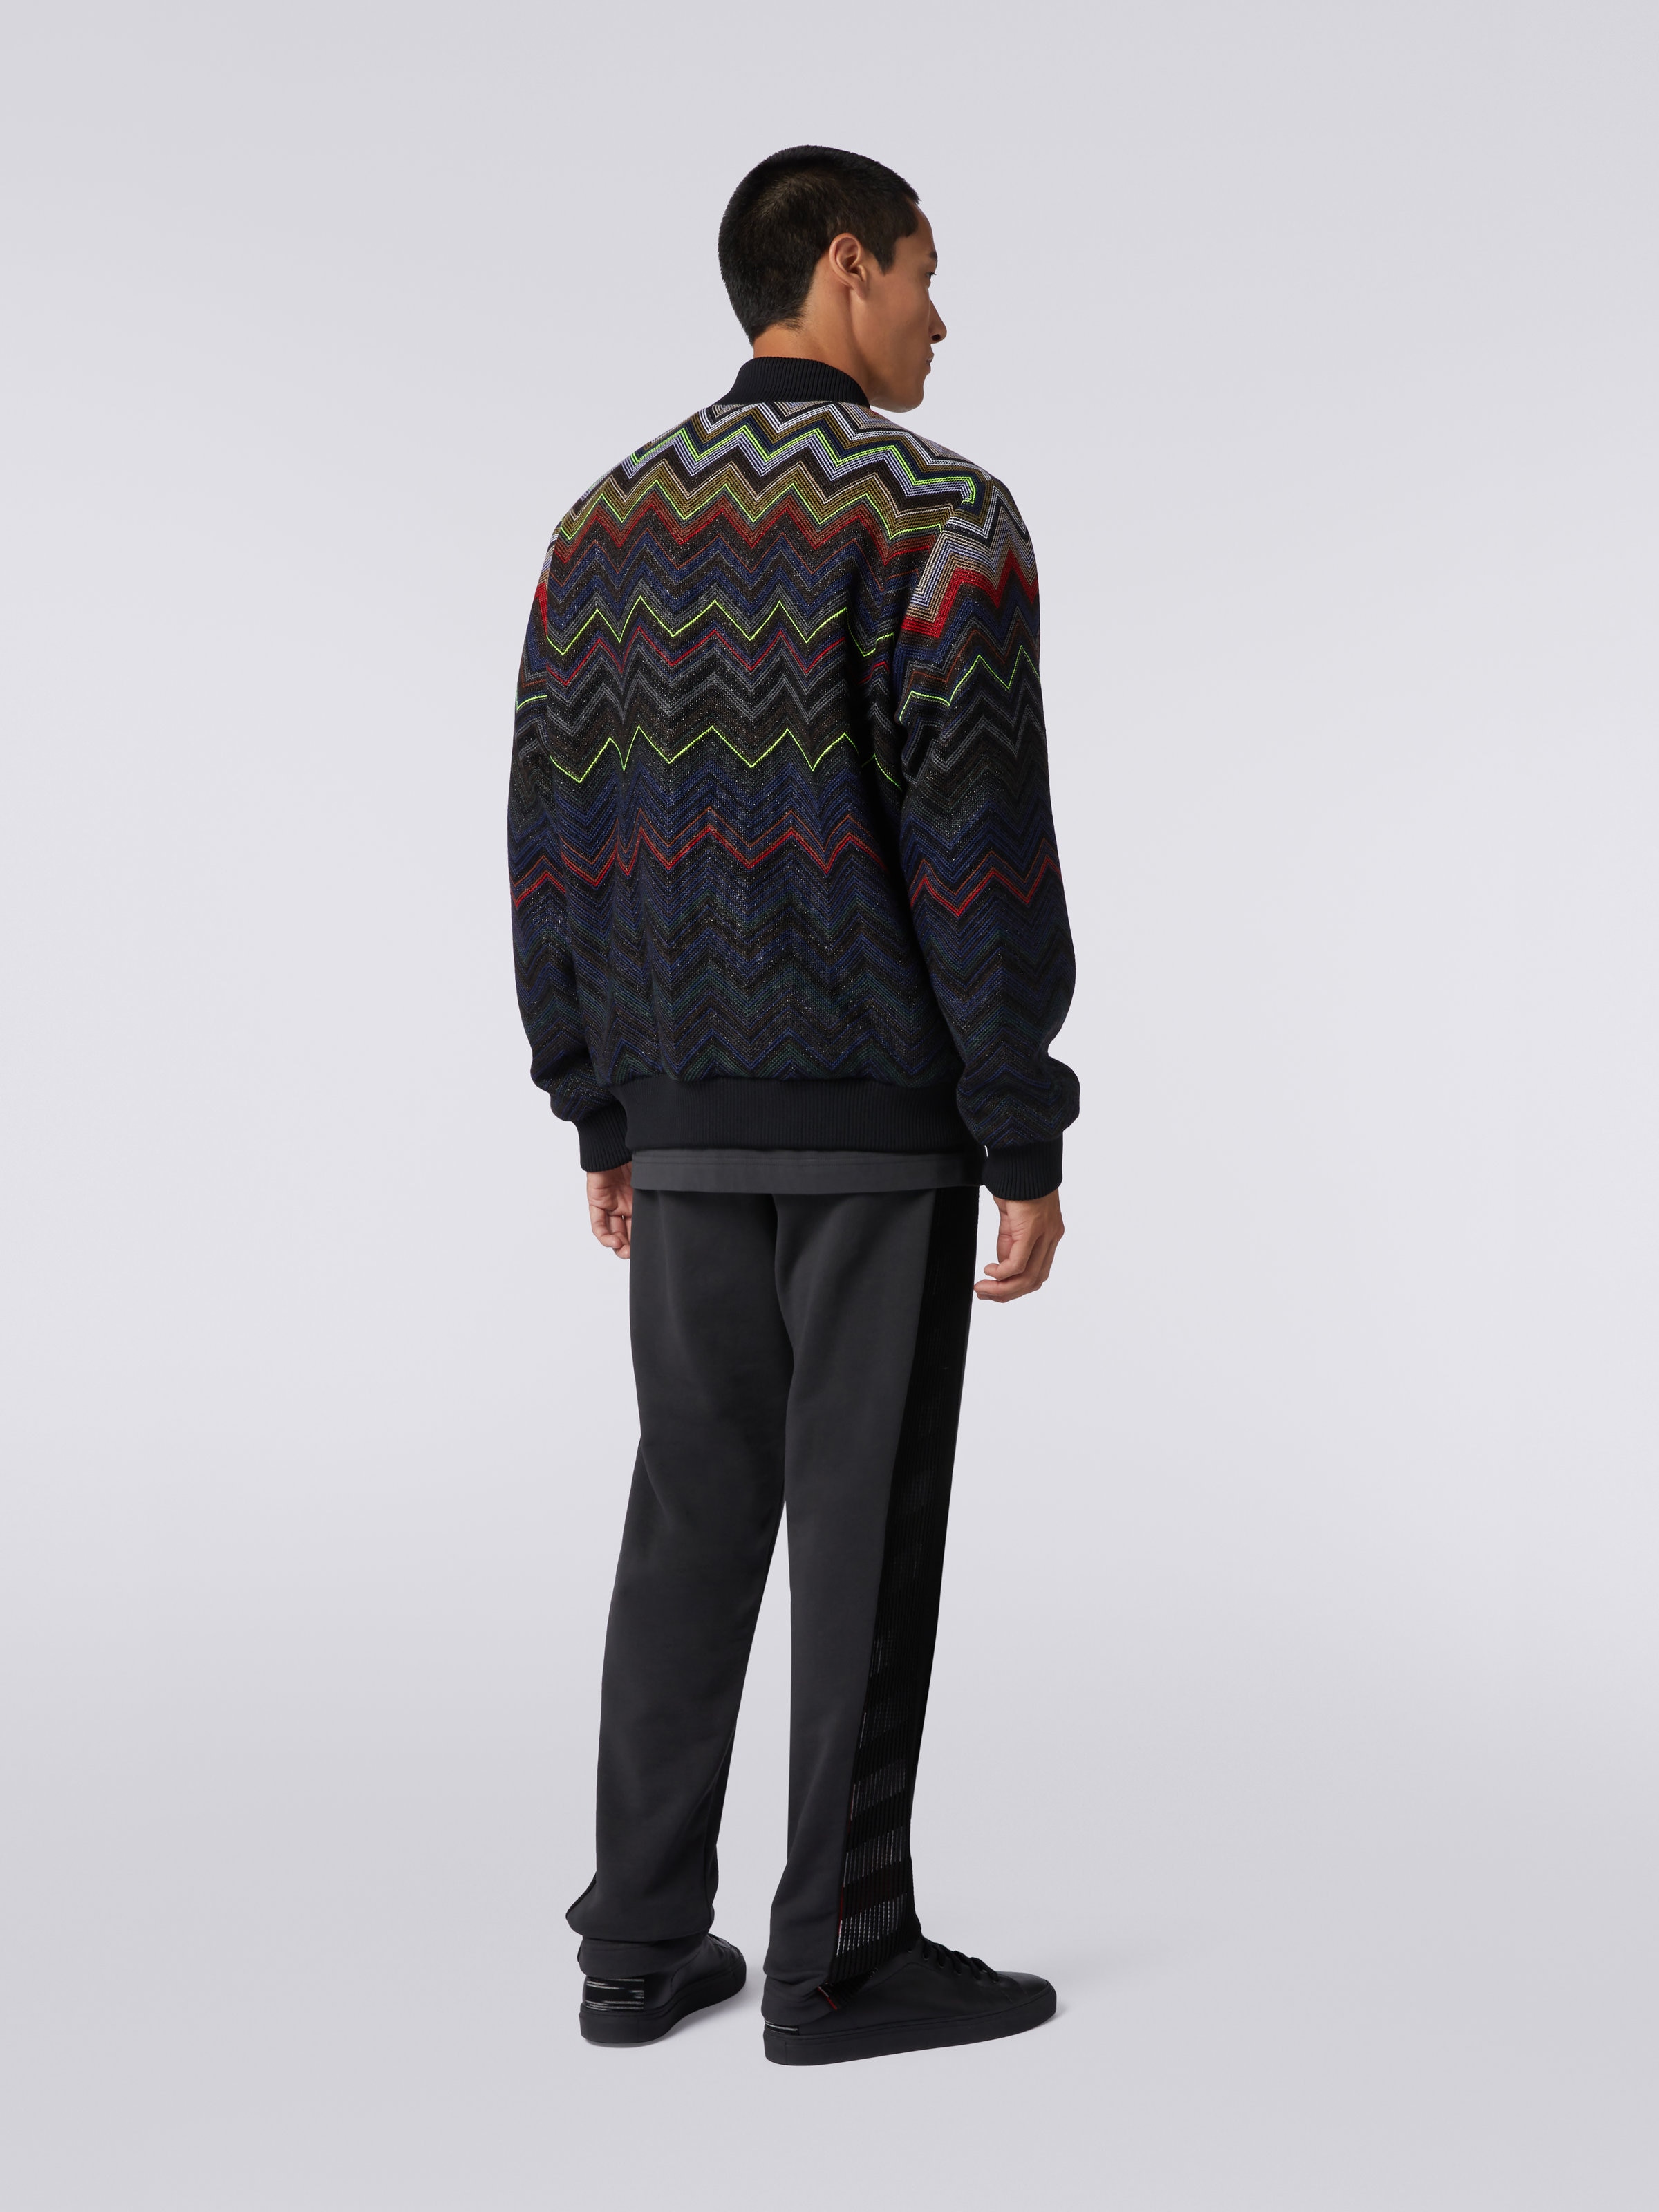 Wool and cotton blend chevron bomber jacket in collaboration with Mike Maignan, Multicoloured - 3